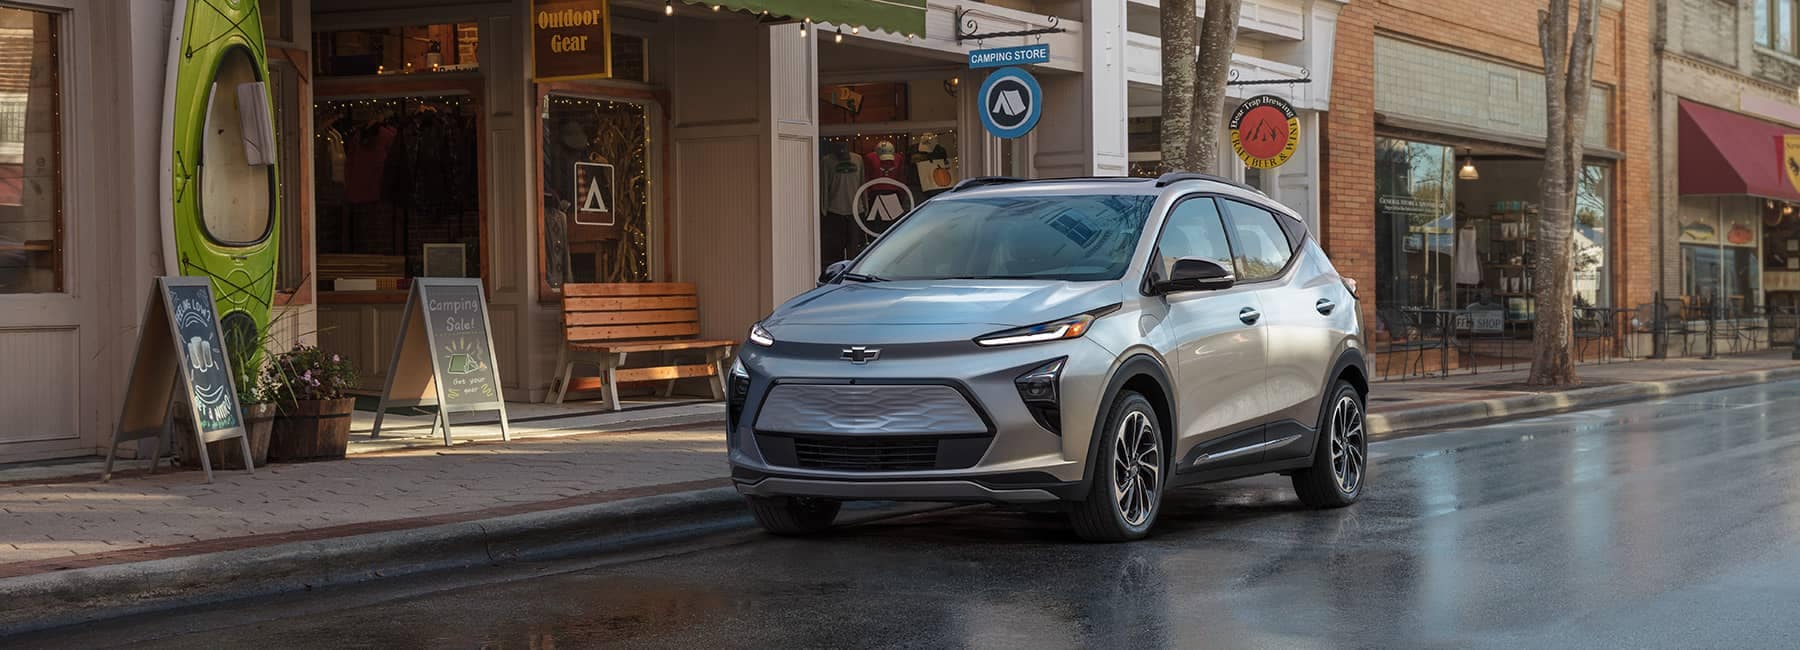 2022 Bolt EUV Premier in Silver Flare Metallic Parked in Front of Storefronts